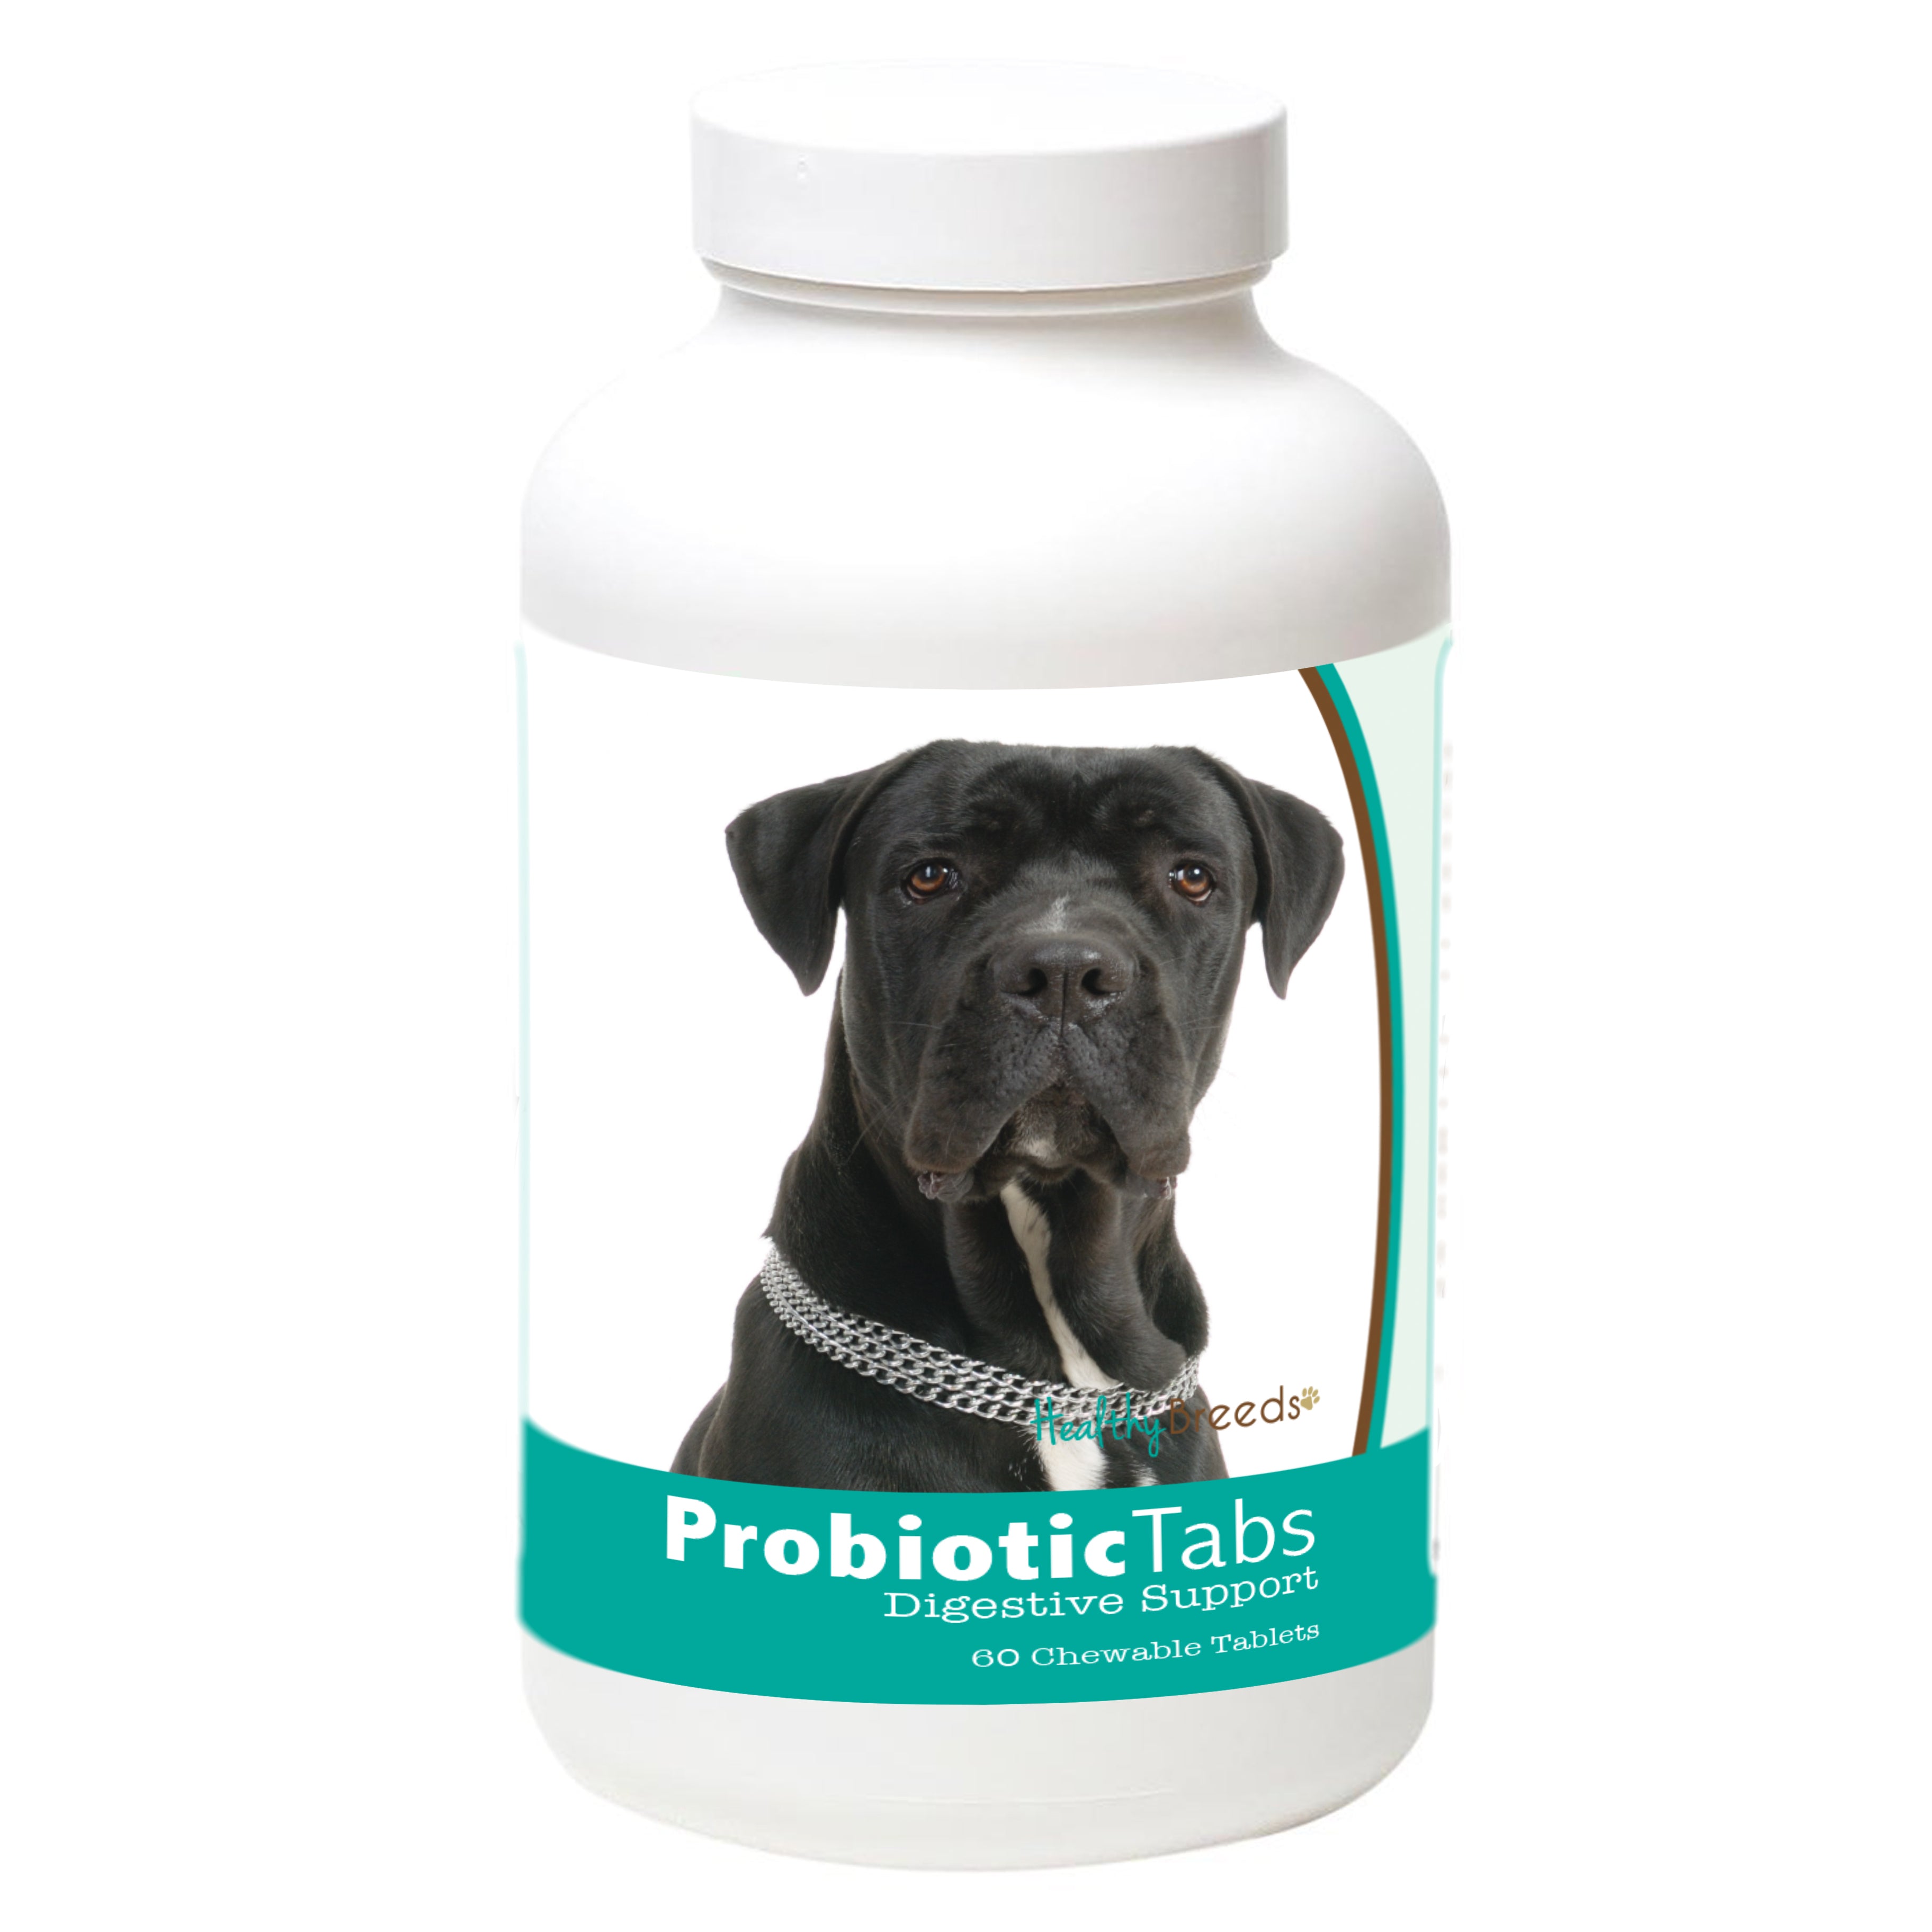 Cane Corso Probiotic and Digestive Support for Dogs 60 Count